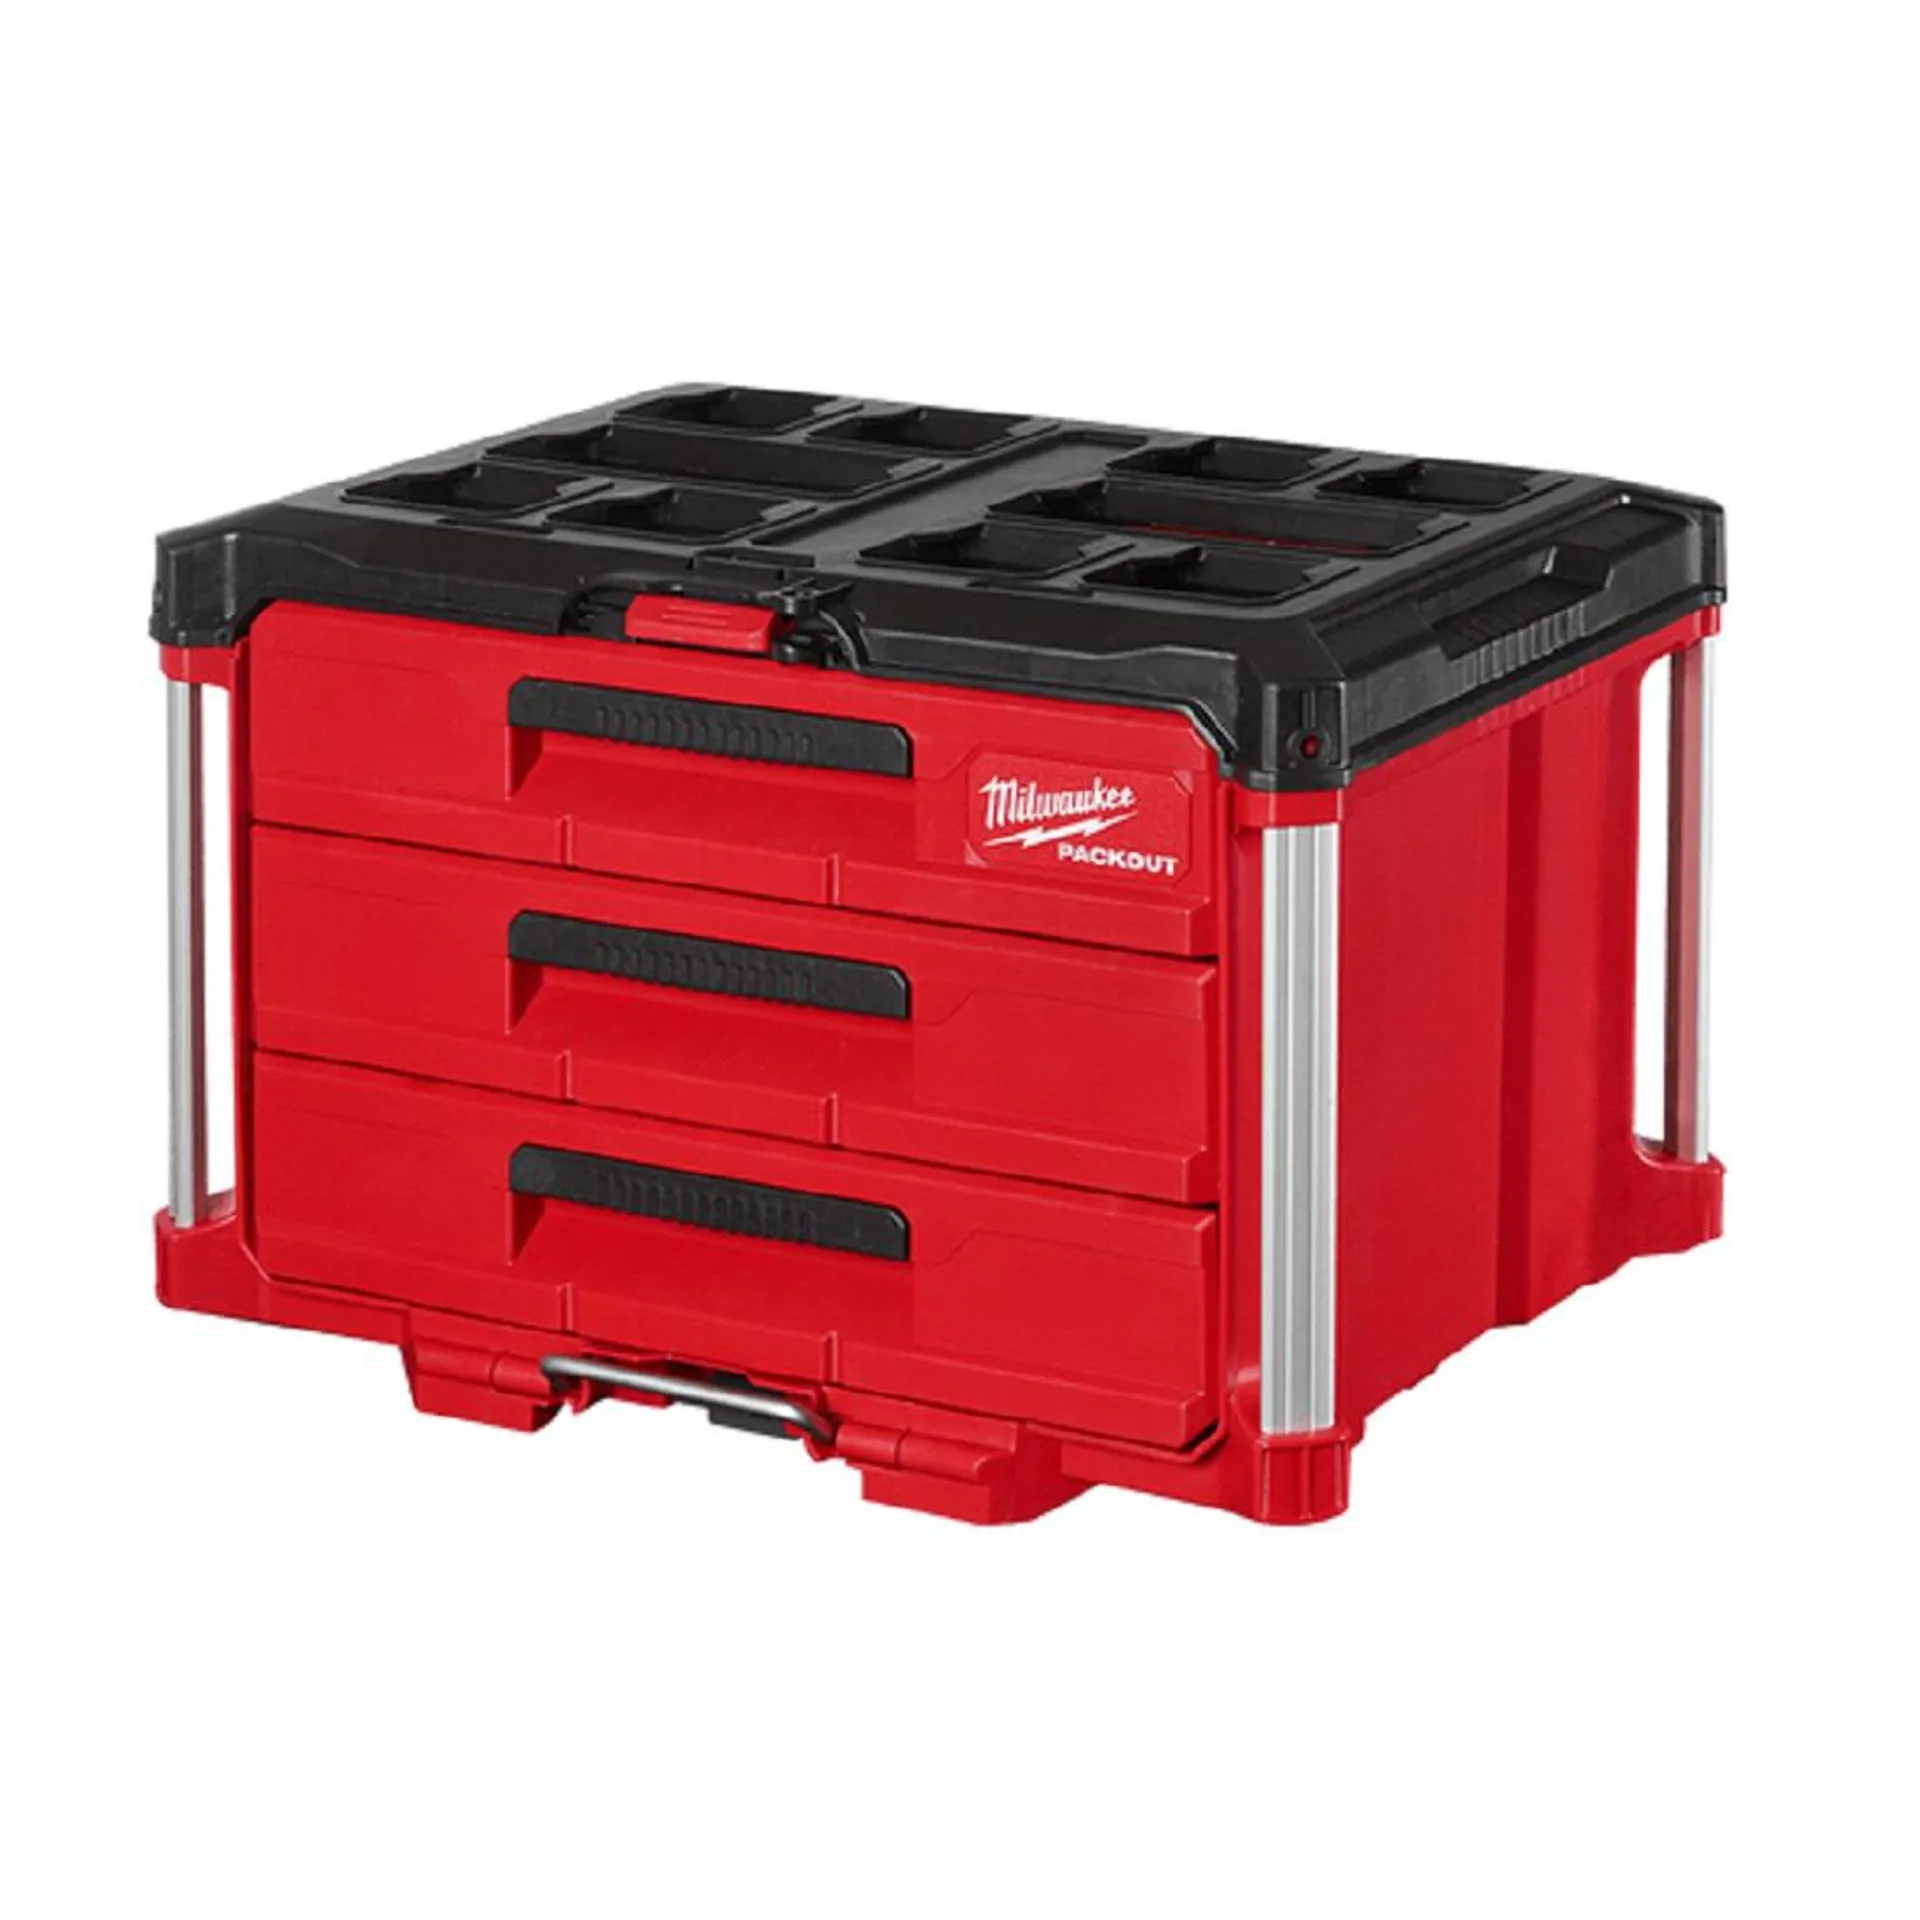 PACKOUT Tool Box 3 Drawer